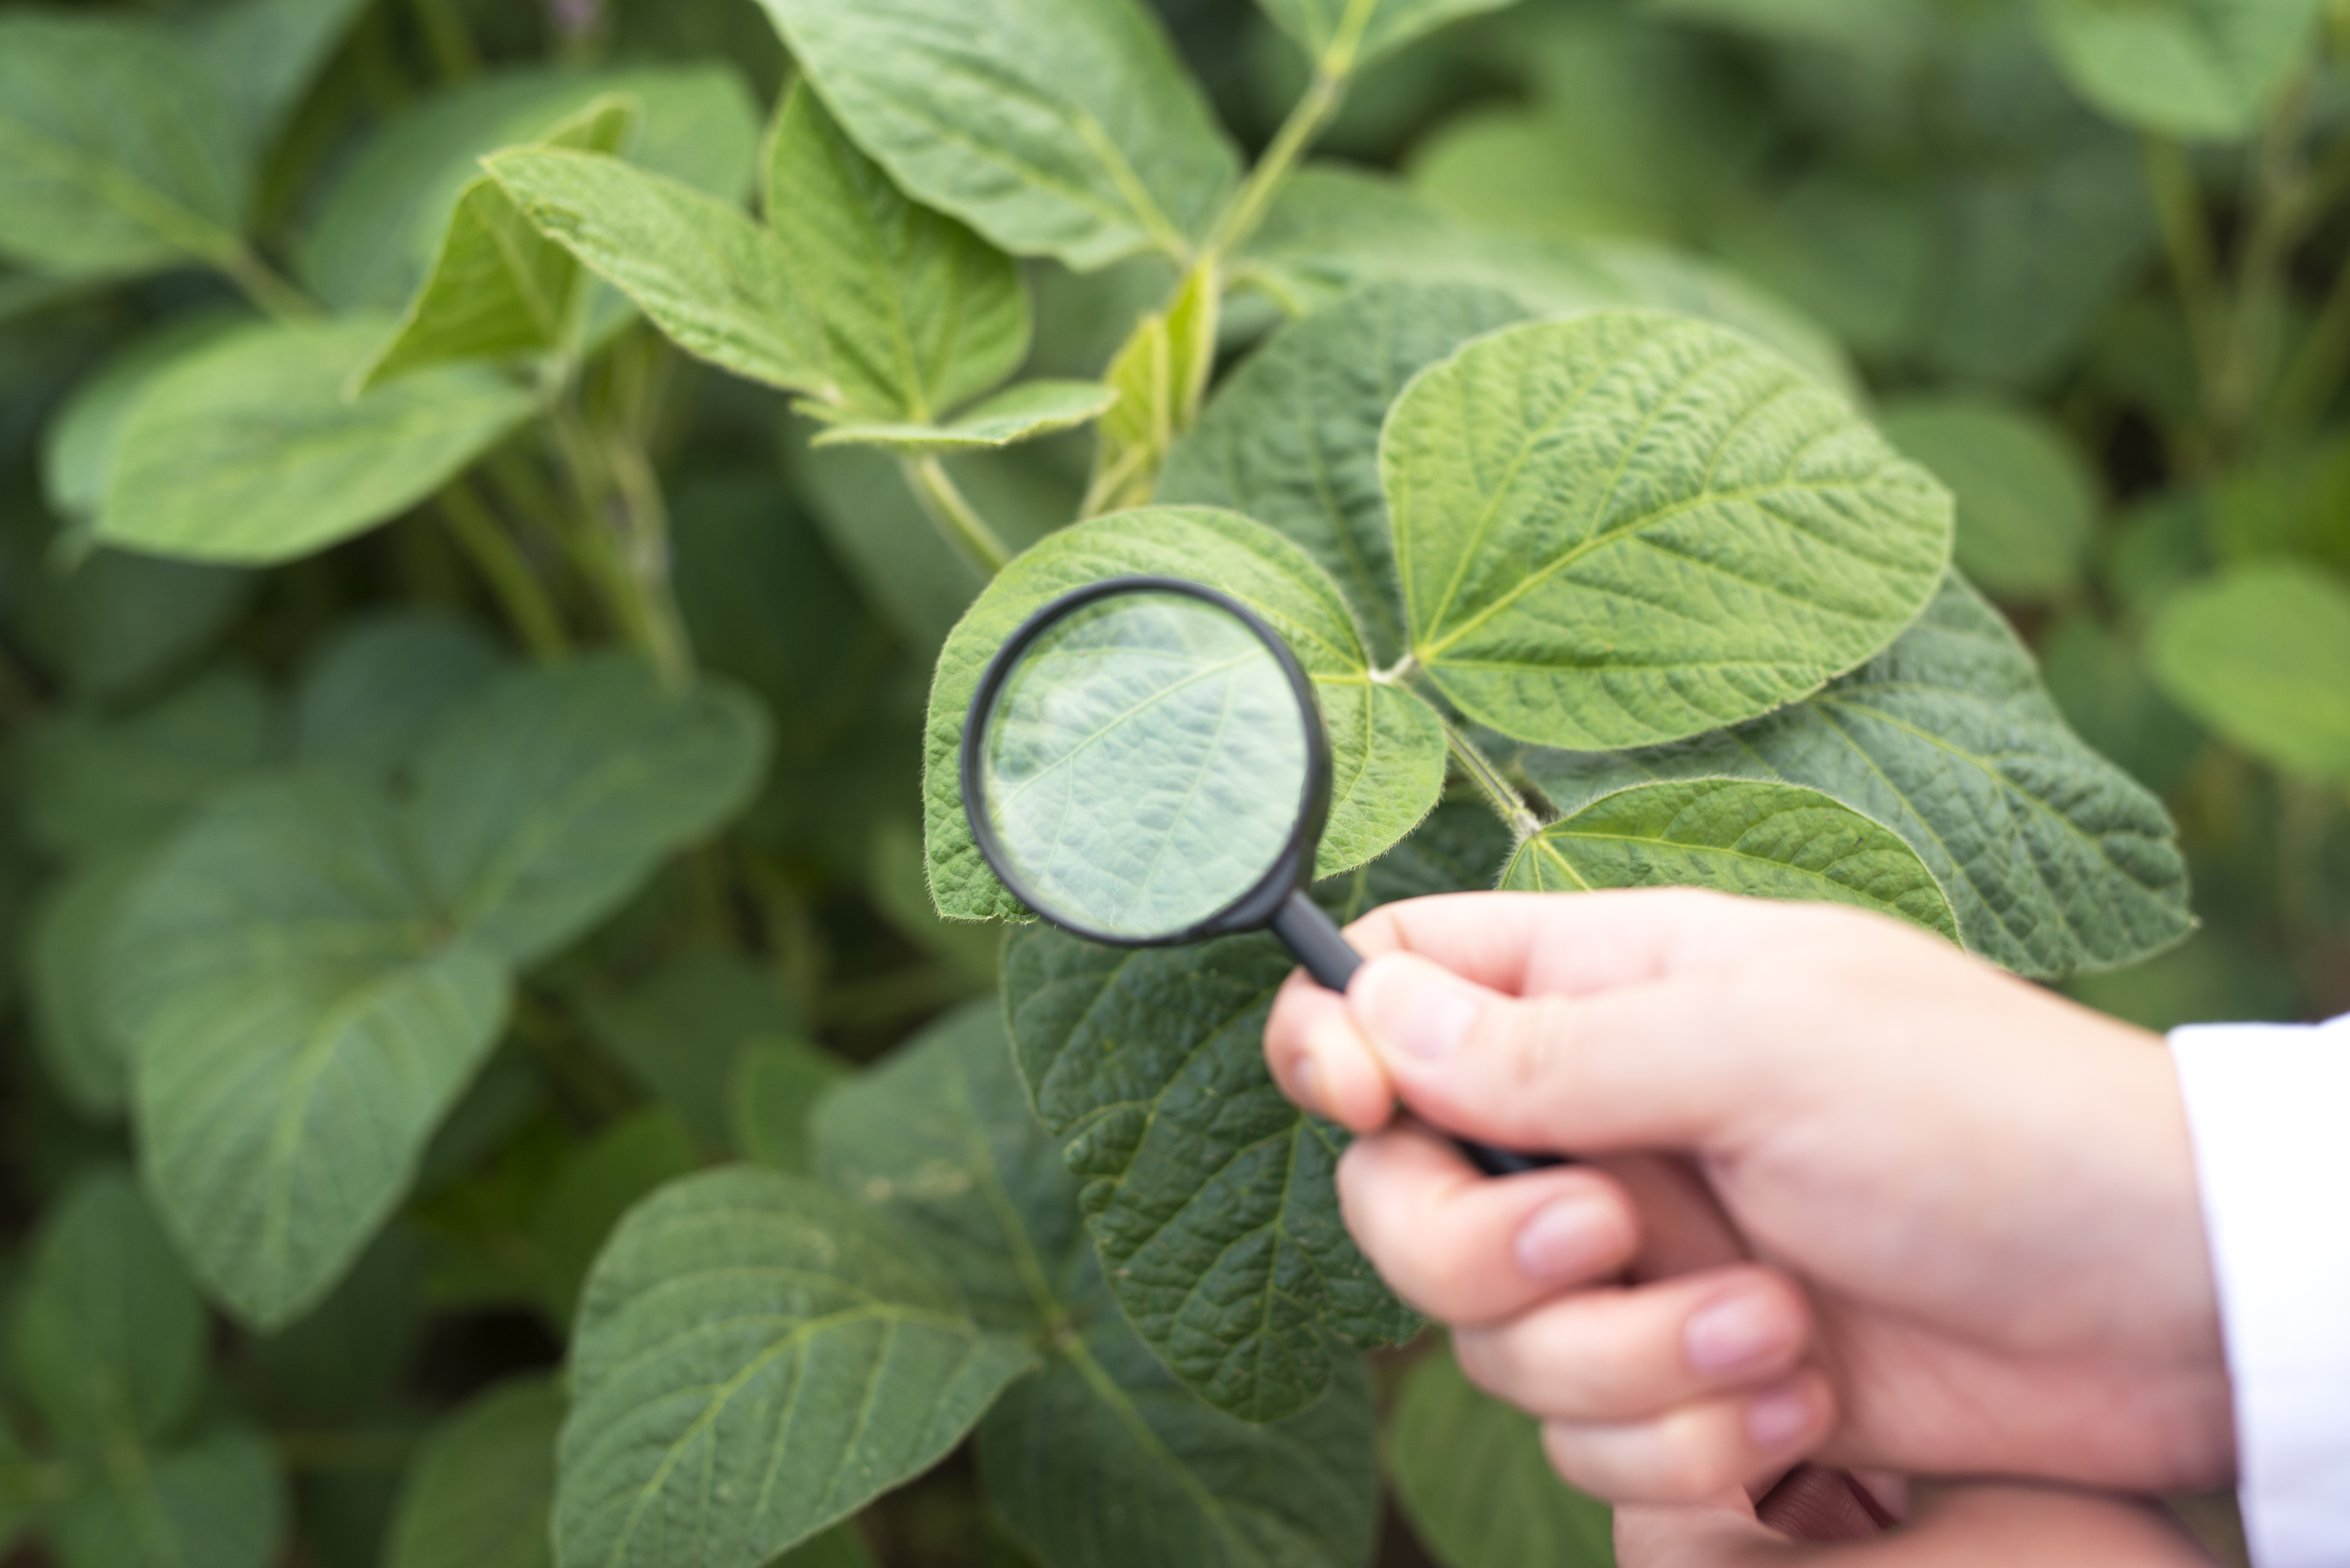 Hand holding a magnifying glass in front of a bean plant leaf